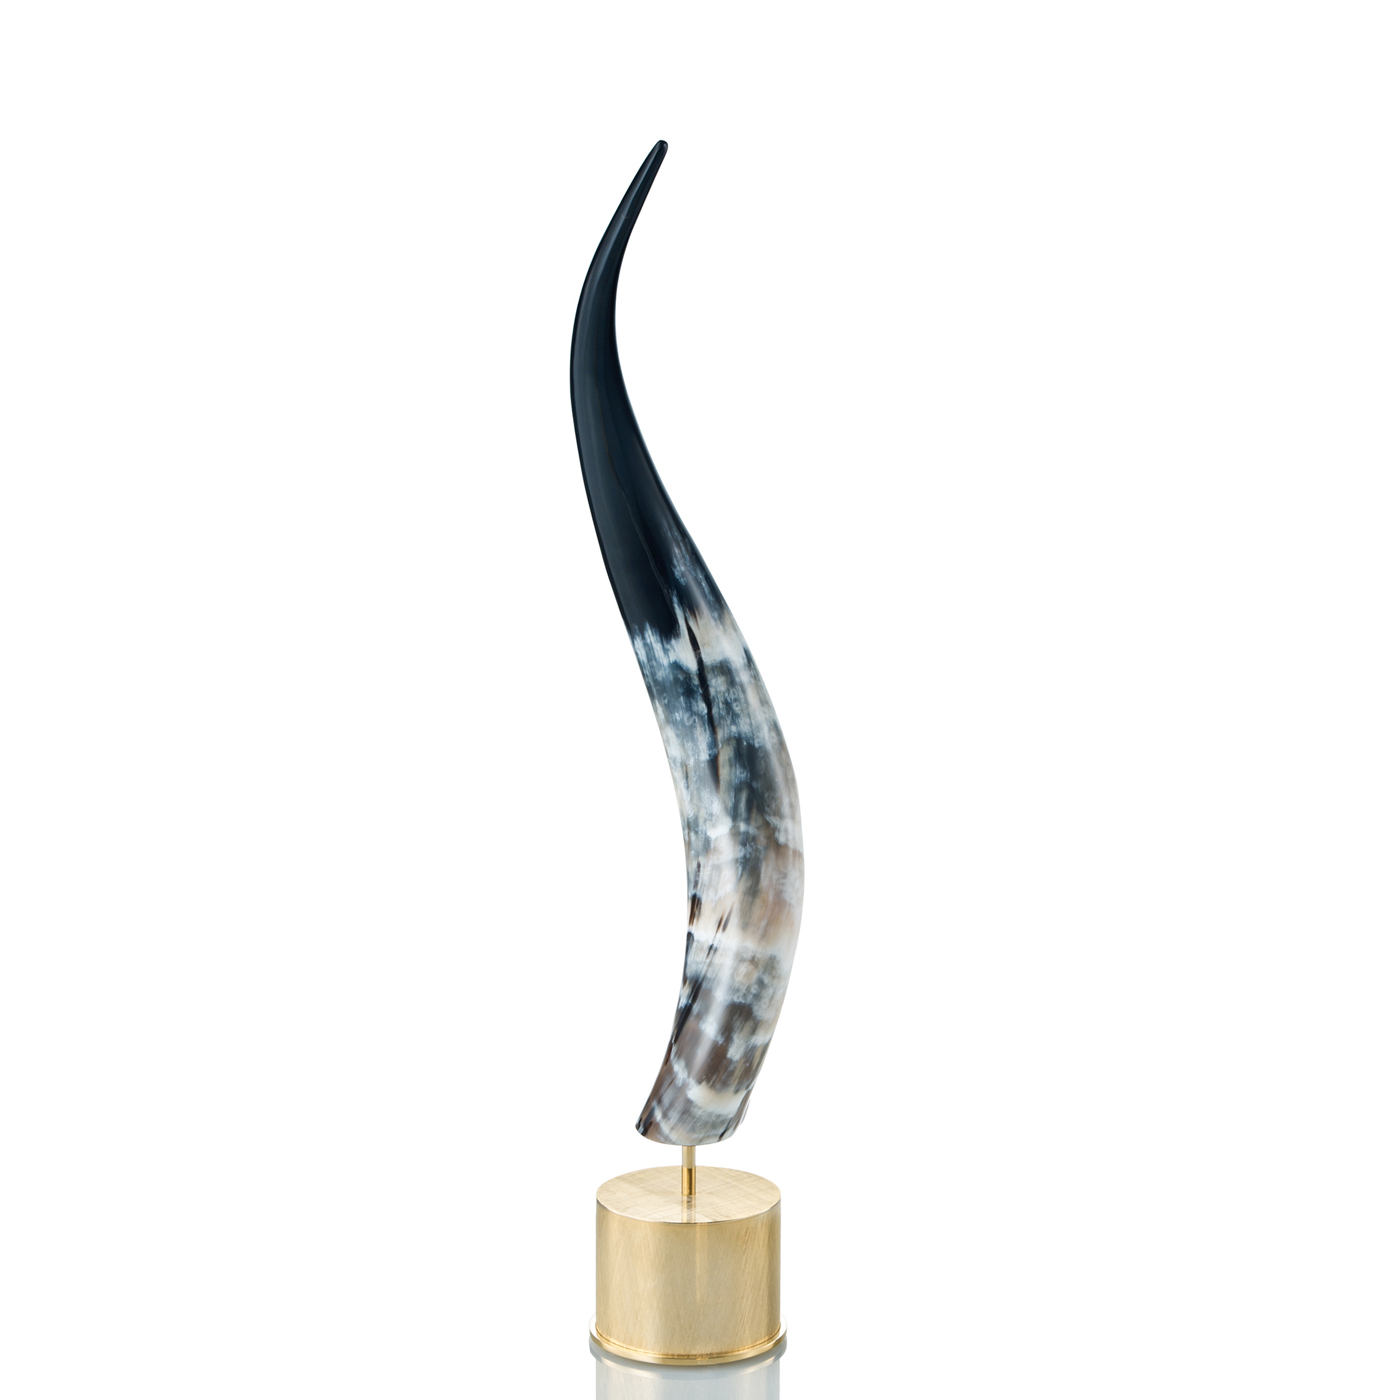 Sculptures - Auriga sculpture in horn and hand engraved 24k gold plated brass - Arcahorn